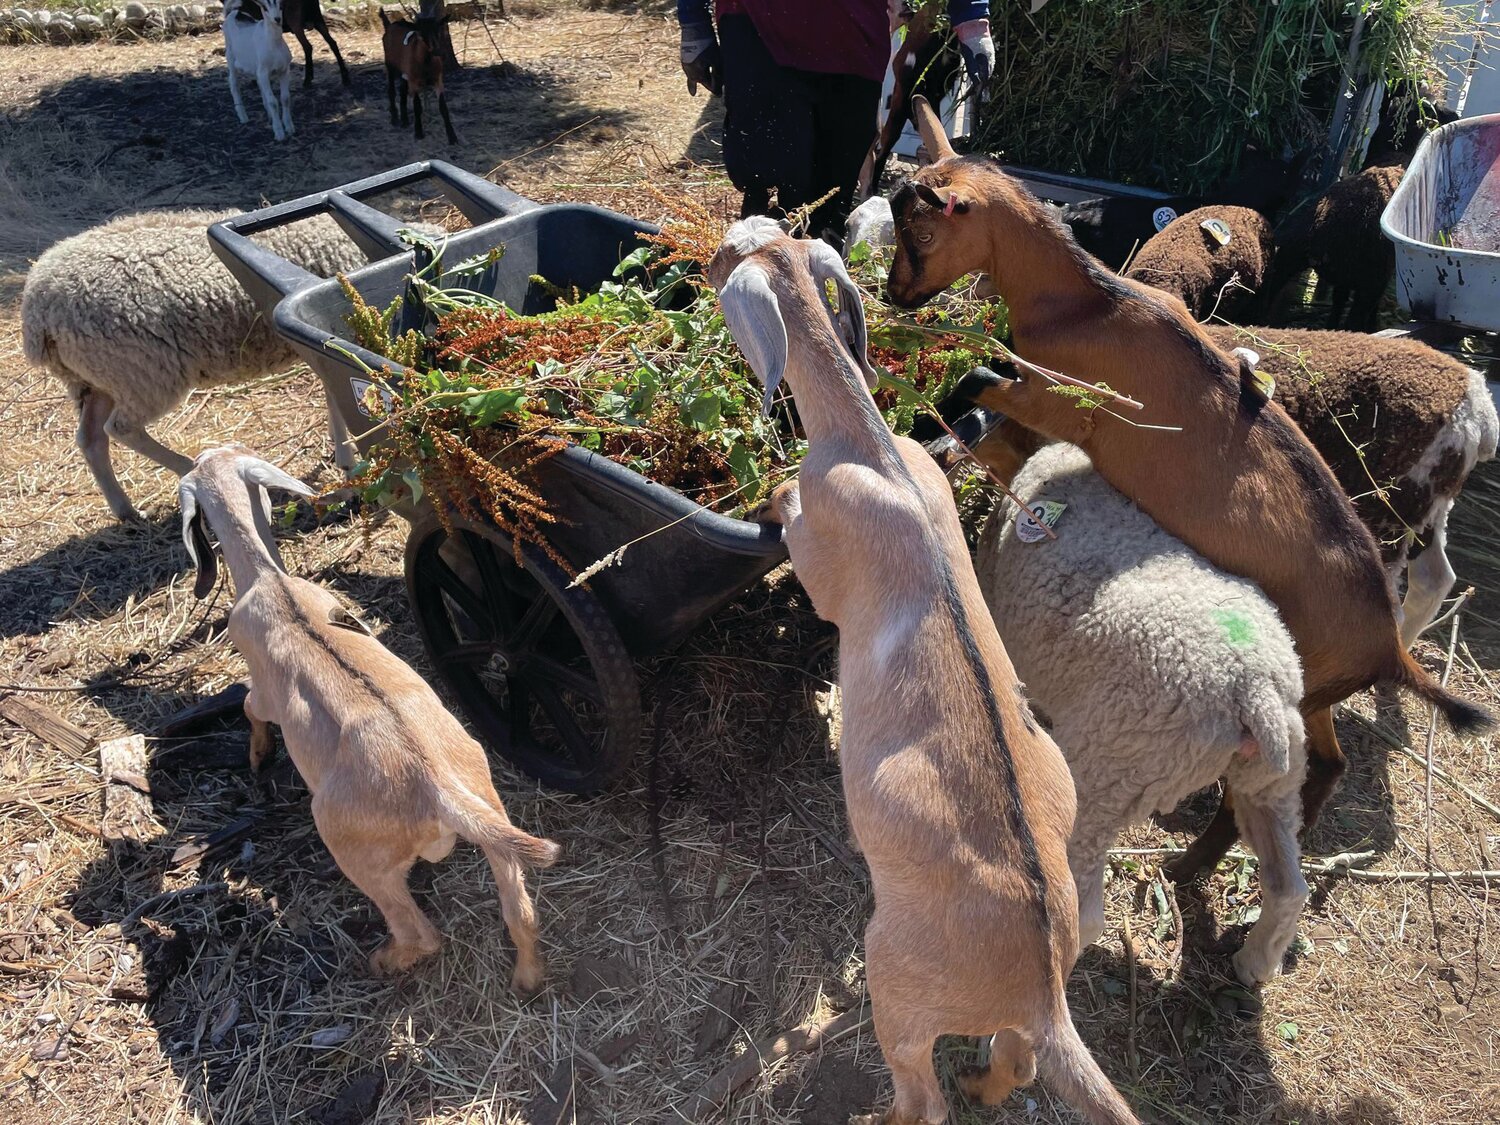 Animals at Dancing Goats and Singing Chickens Organic Farm graze on produce.